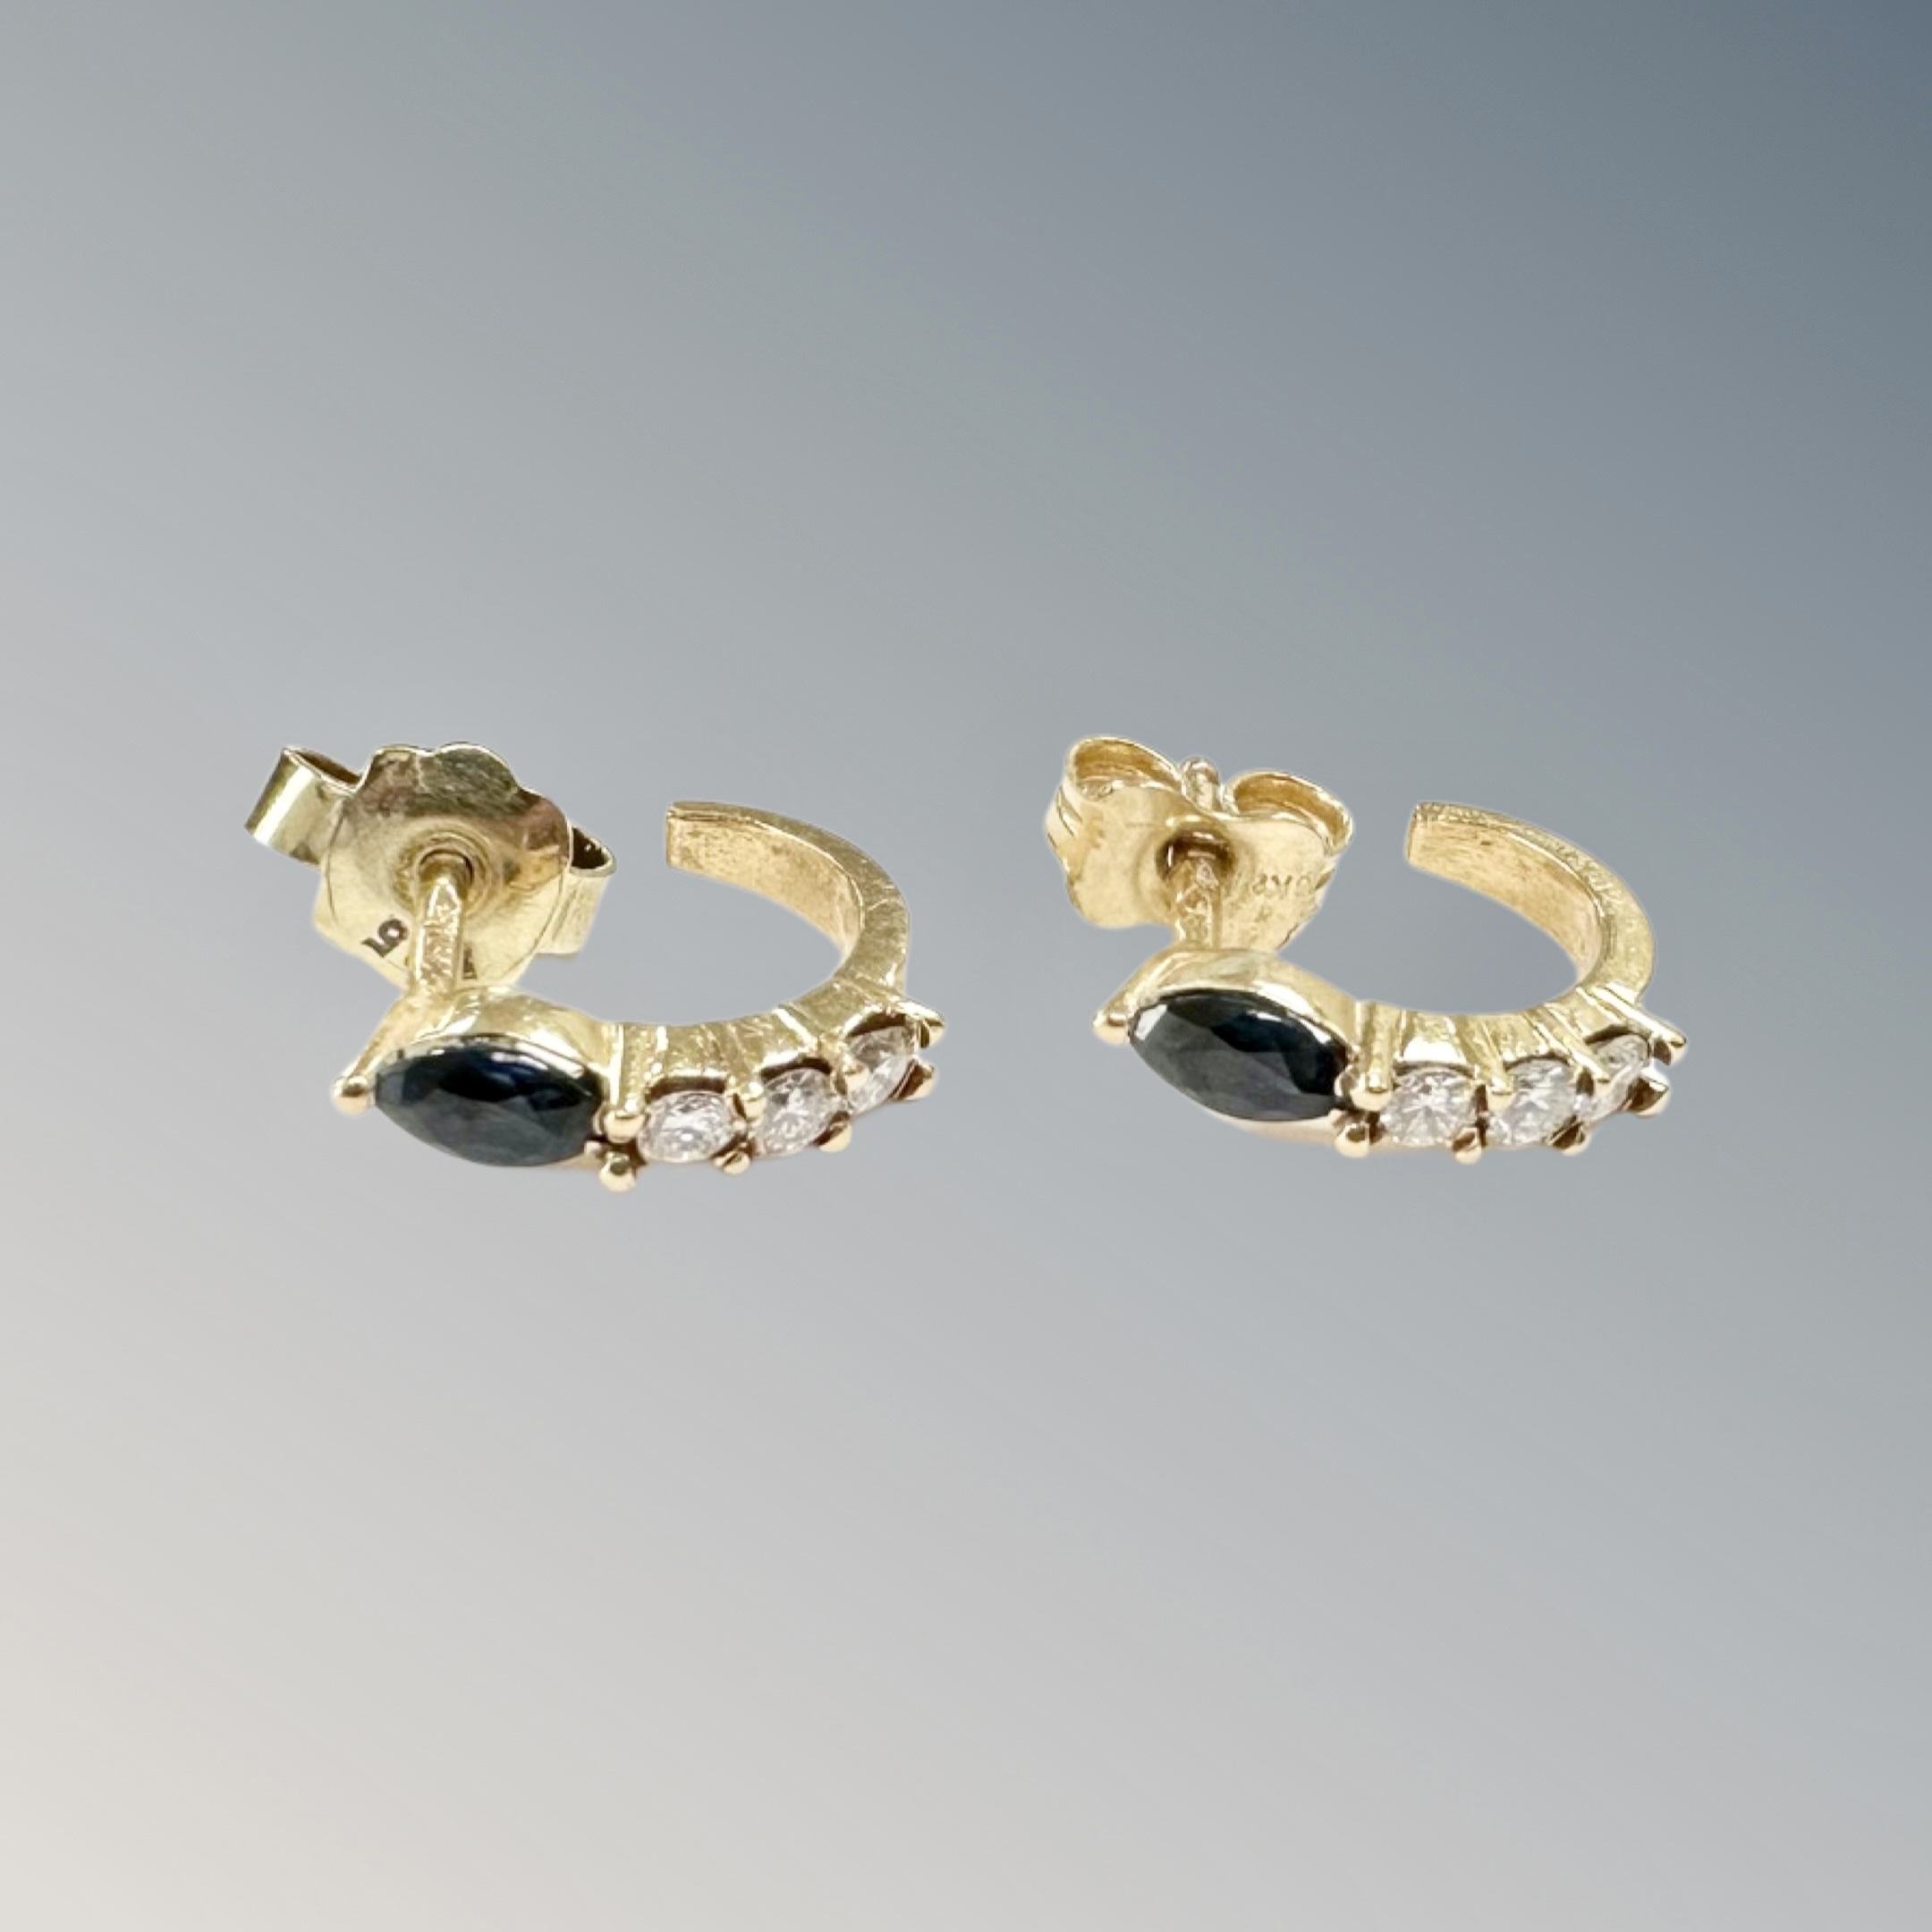 A pair of 18ct yellow gold earrings each set with marquis sapphire and brilliant cut diamonds, 2.1g.